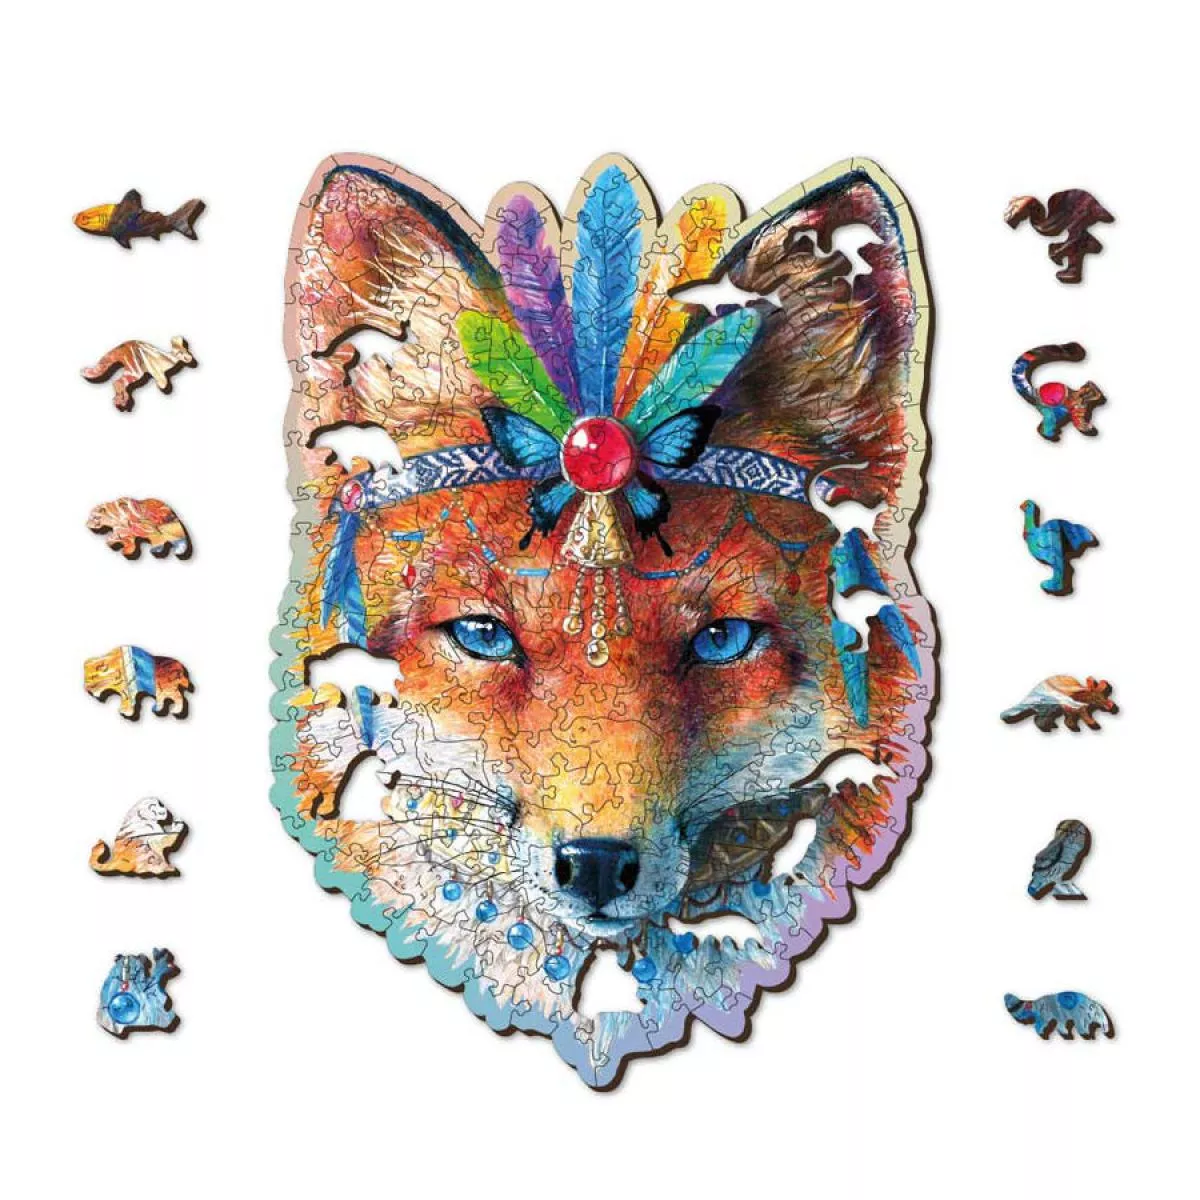 Farbenfrohes Holz-Puzzle "Mystic Fox" – 150 Teile in 20 Formen